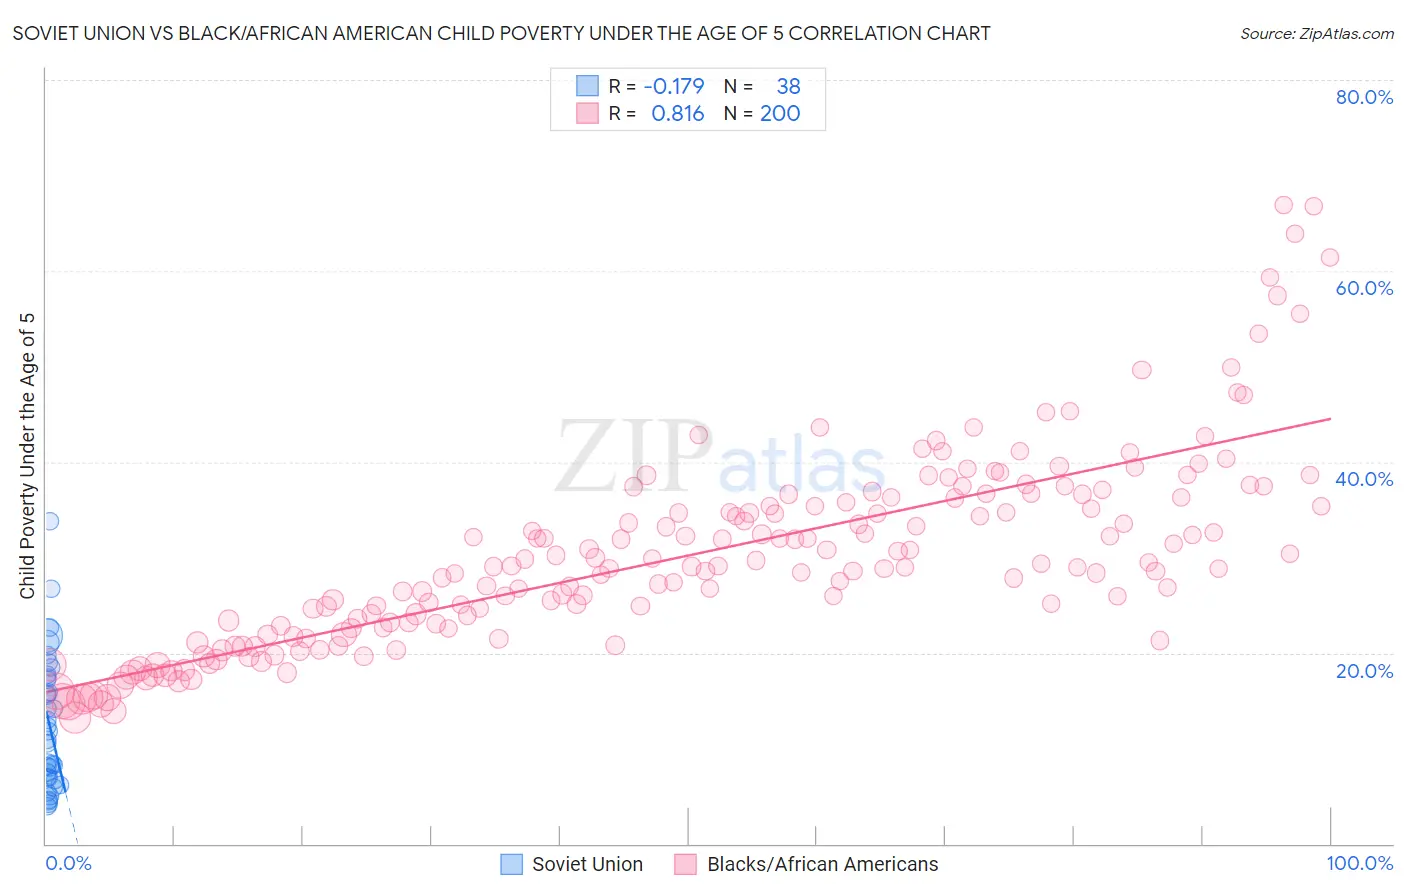 Soviet Union vs Black/African American Child Poverty Under the Age of 5